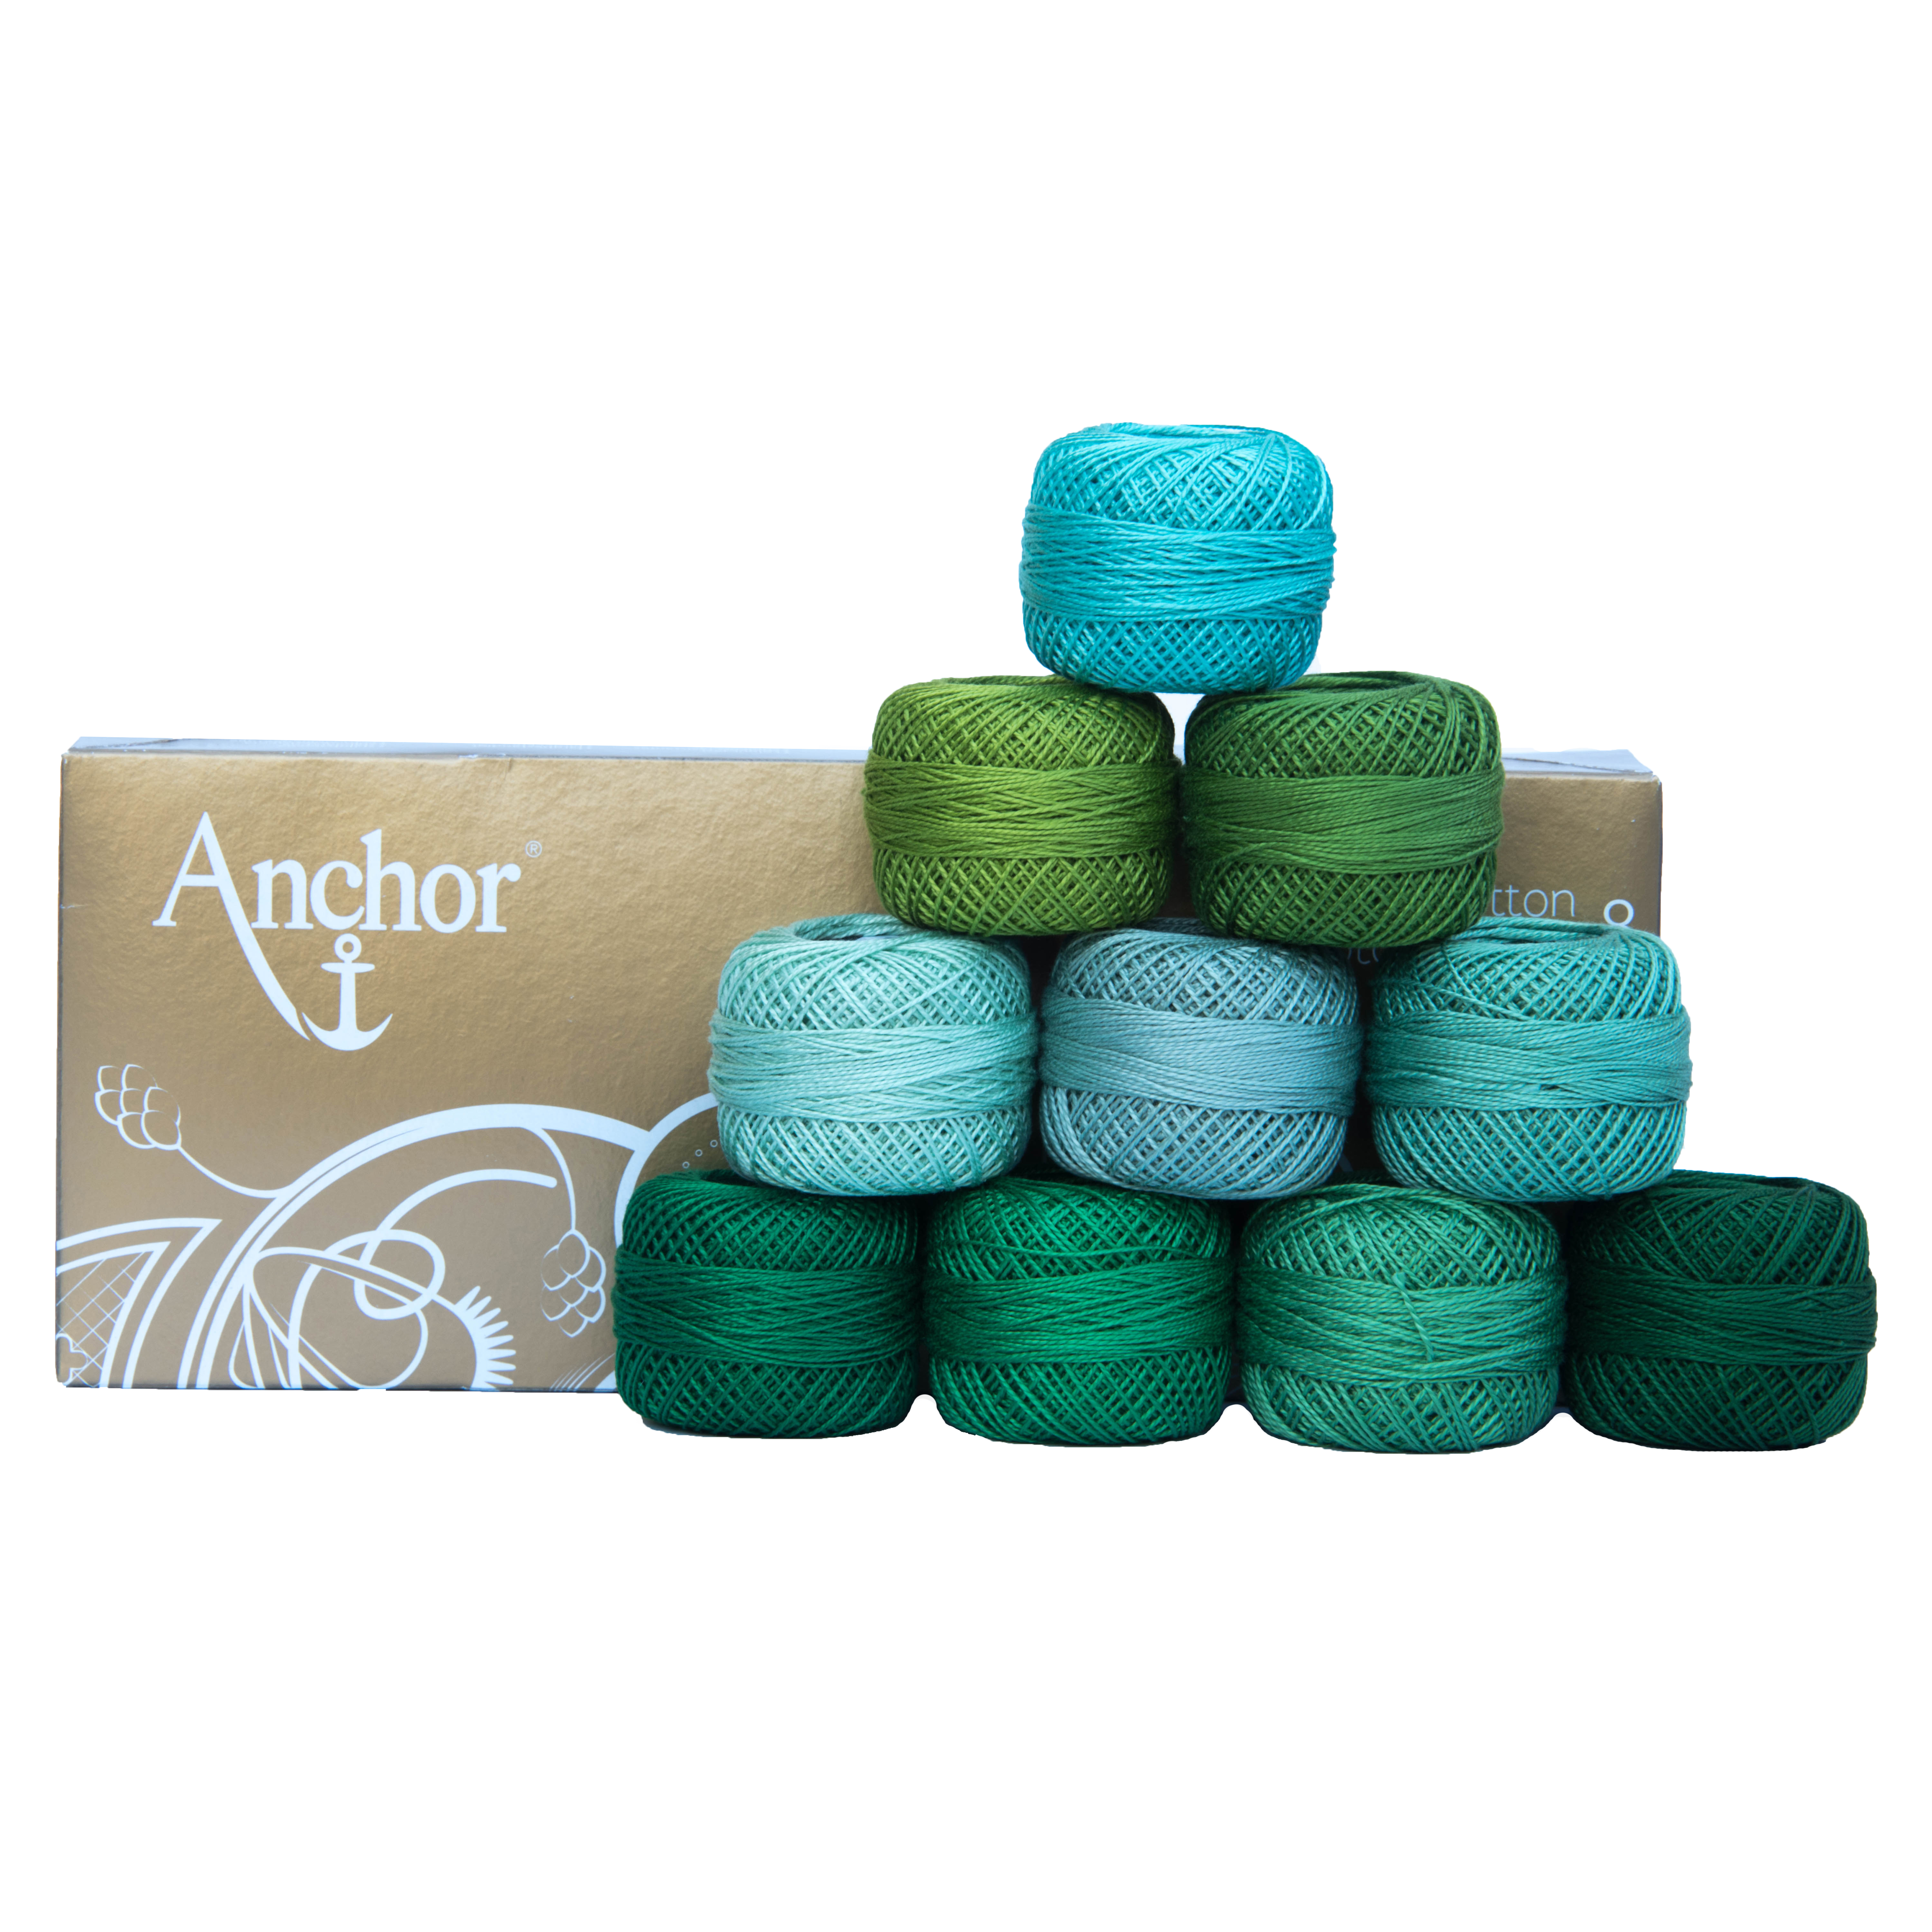 Picture of Pearl Cotton 8: Assortment of Green Shades: 10 x 20g Balls